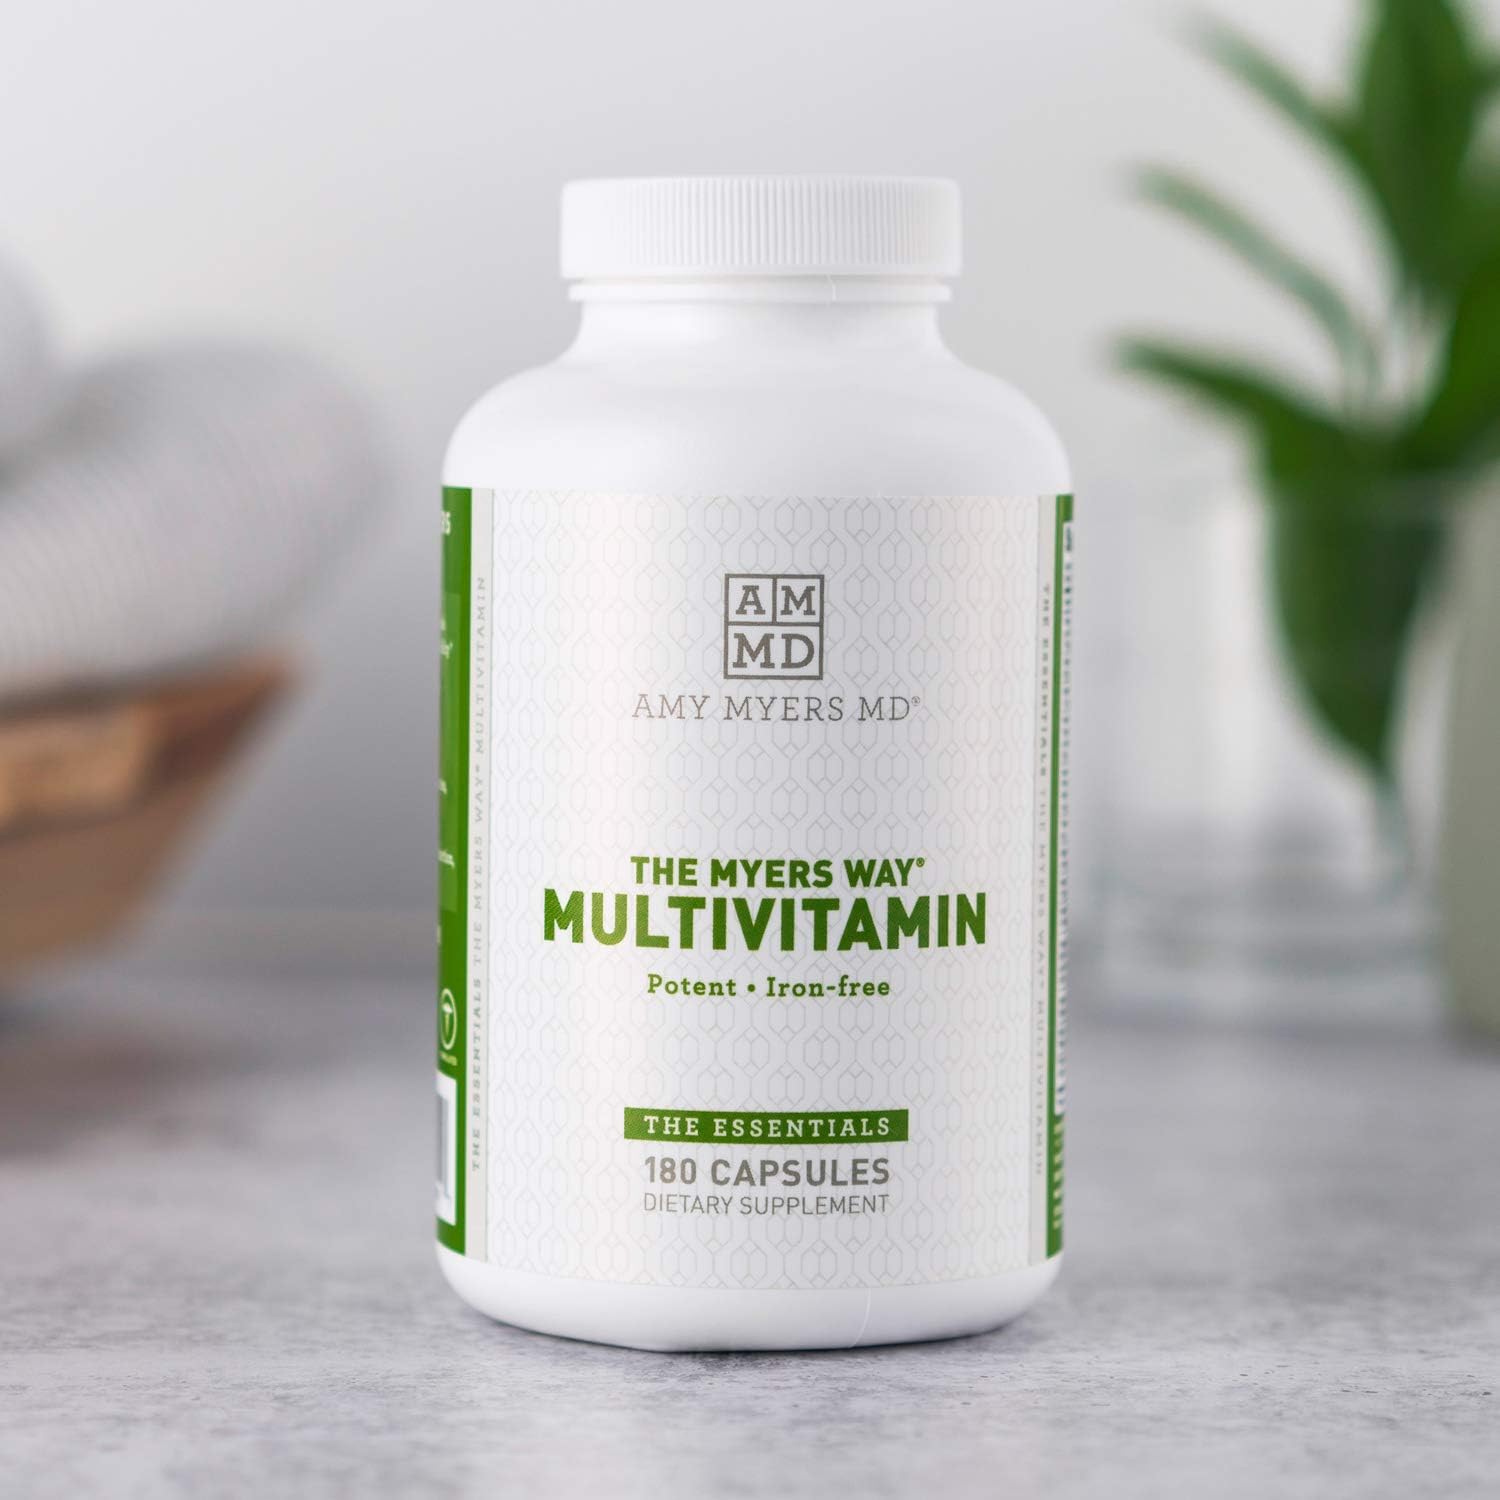 Amy Myers Multivitamin - 180 Caps Lifestyle.